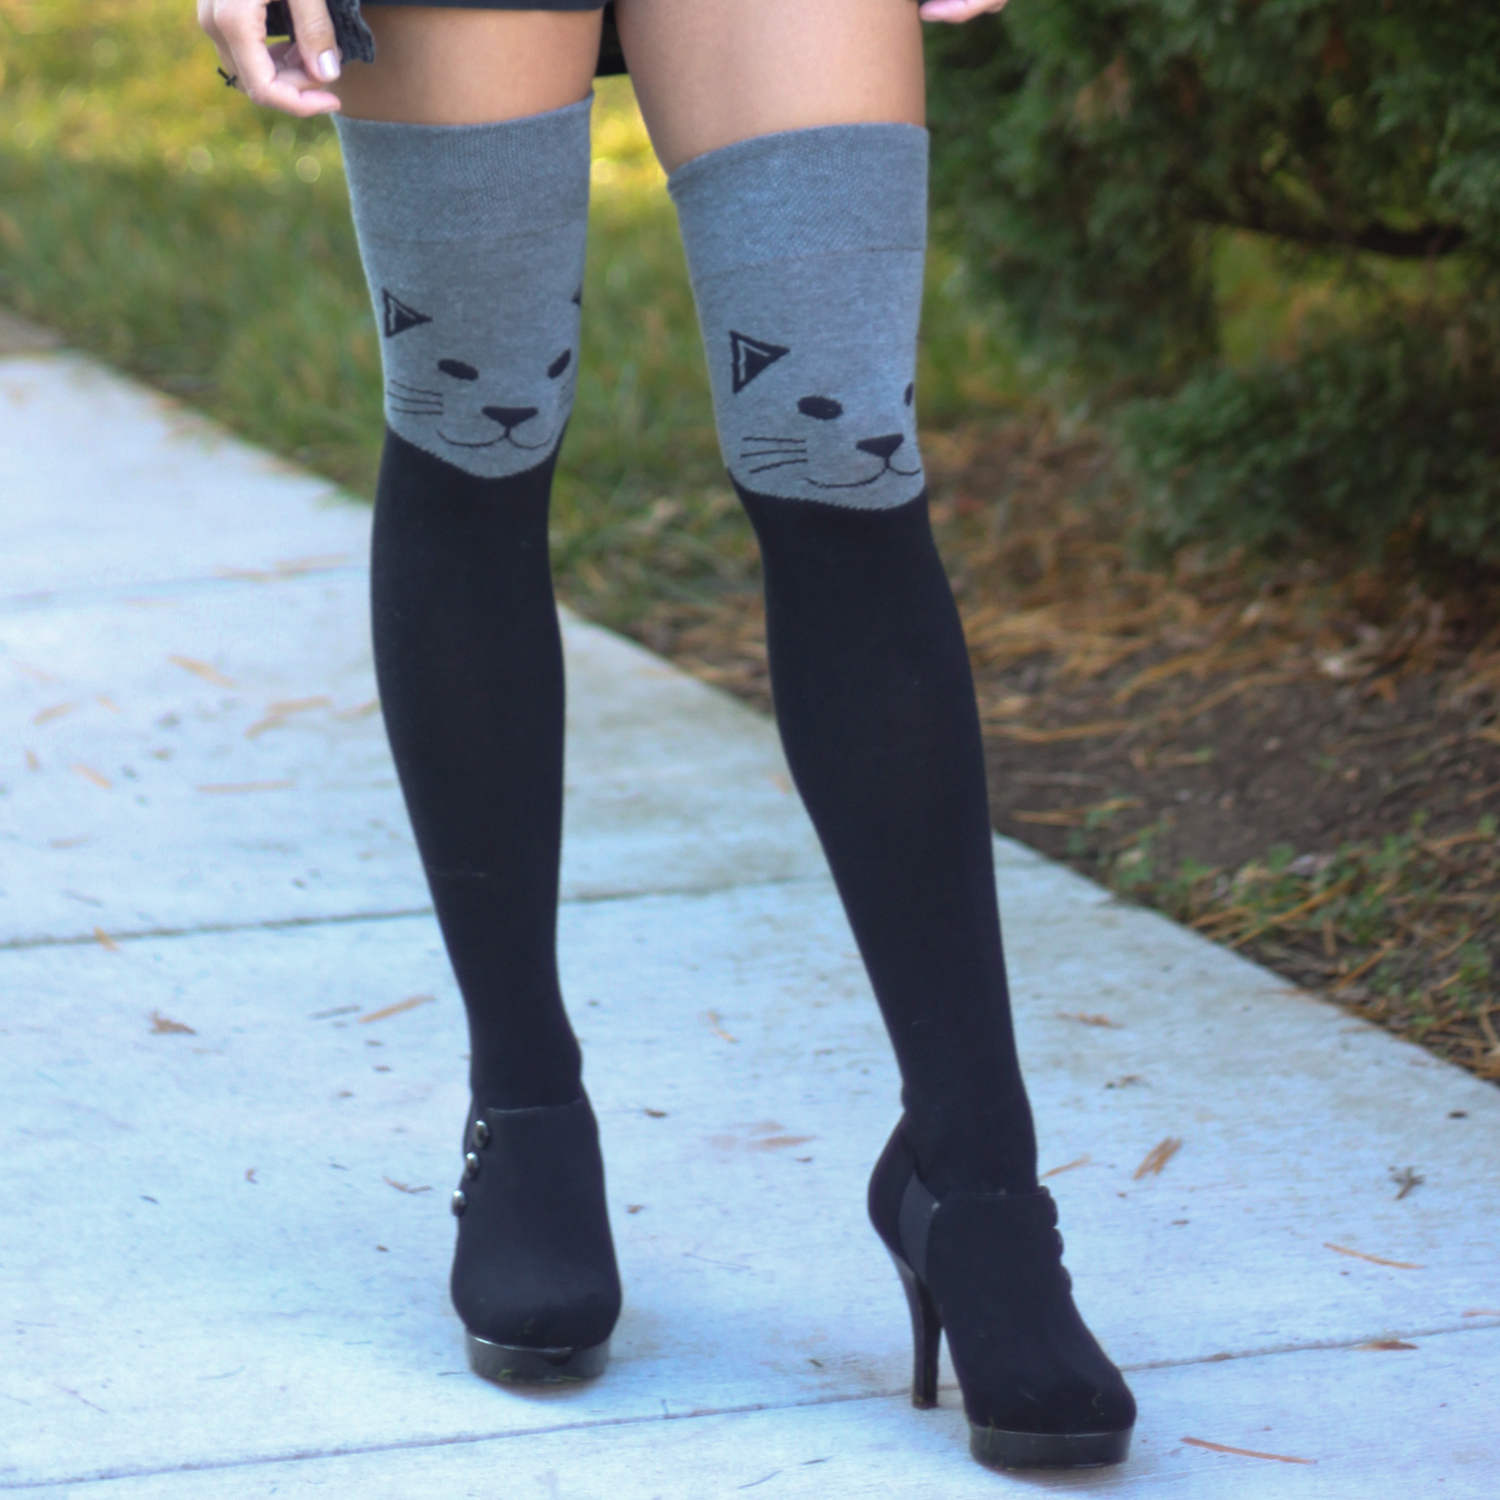 ankle boots with cat socks